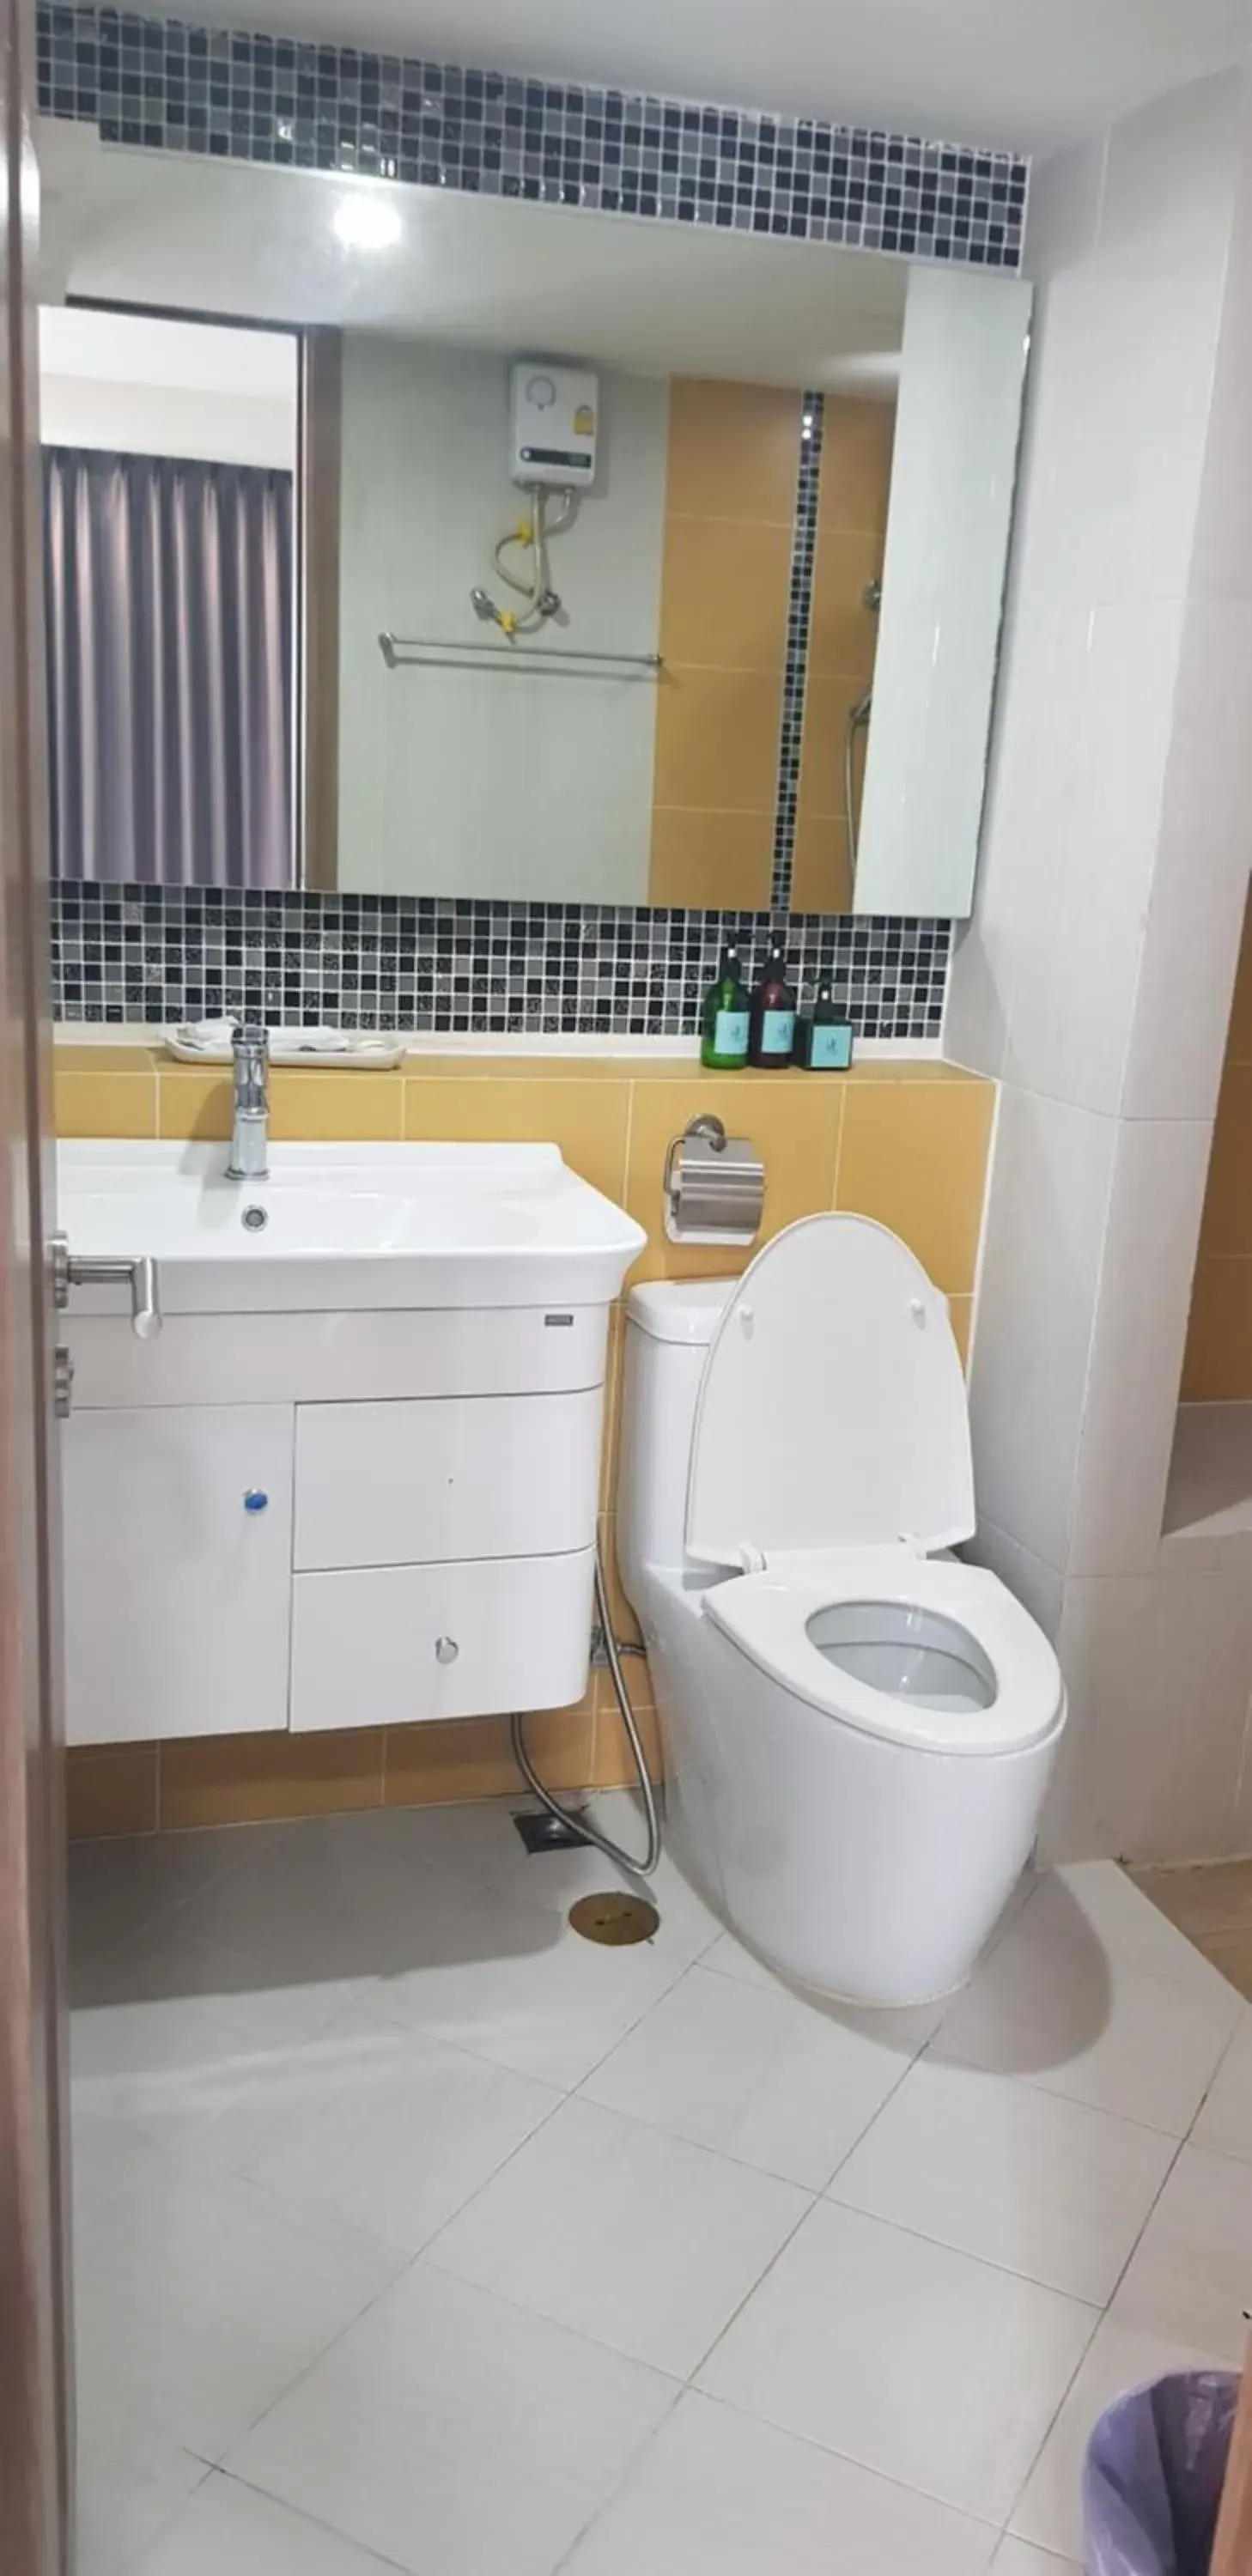 Bathroom in BlueTel Re'sidencE Bangkok IMPACT- 1 Time Drop-Off Service to IMPACT